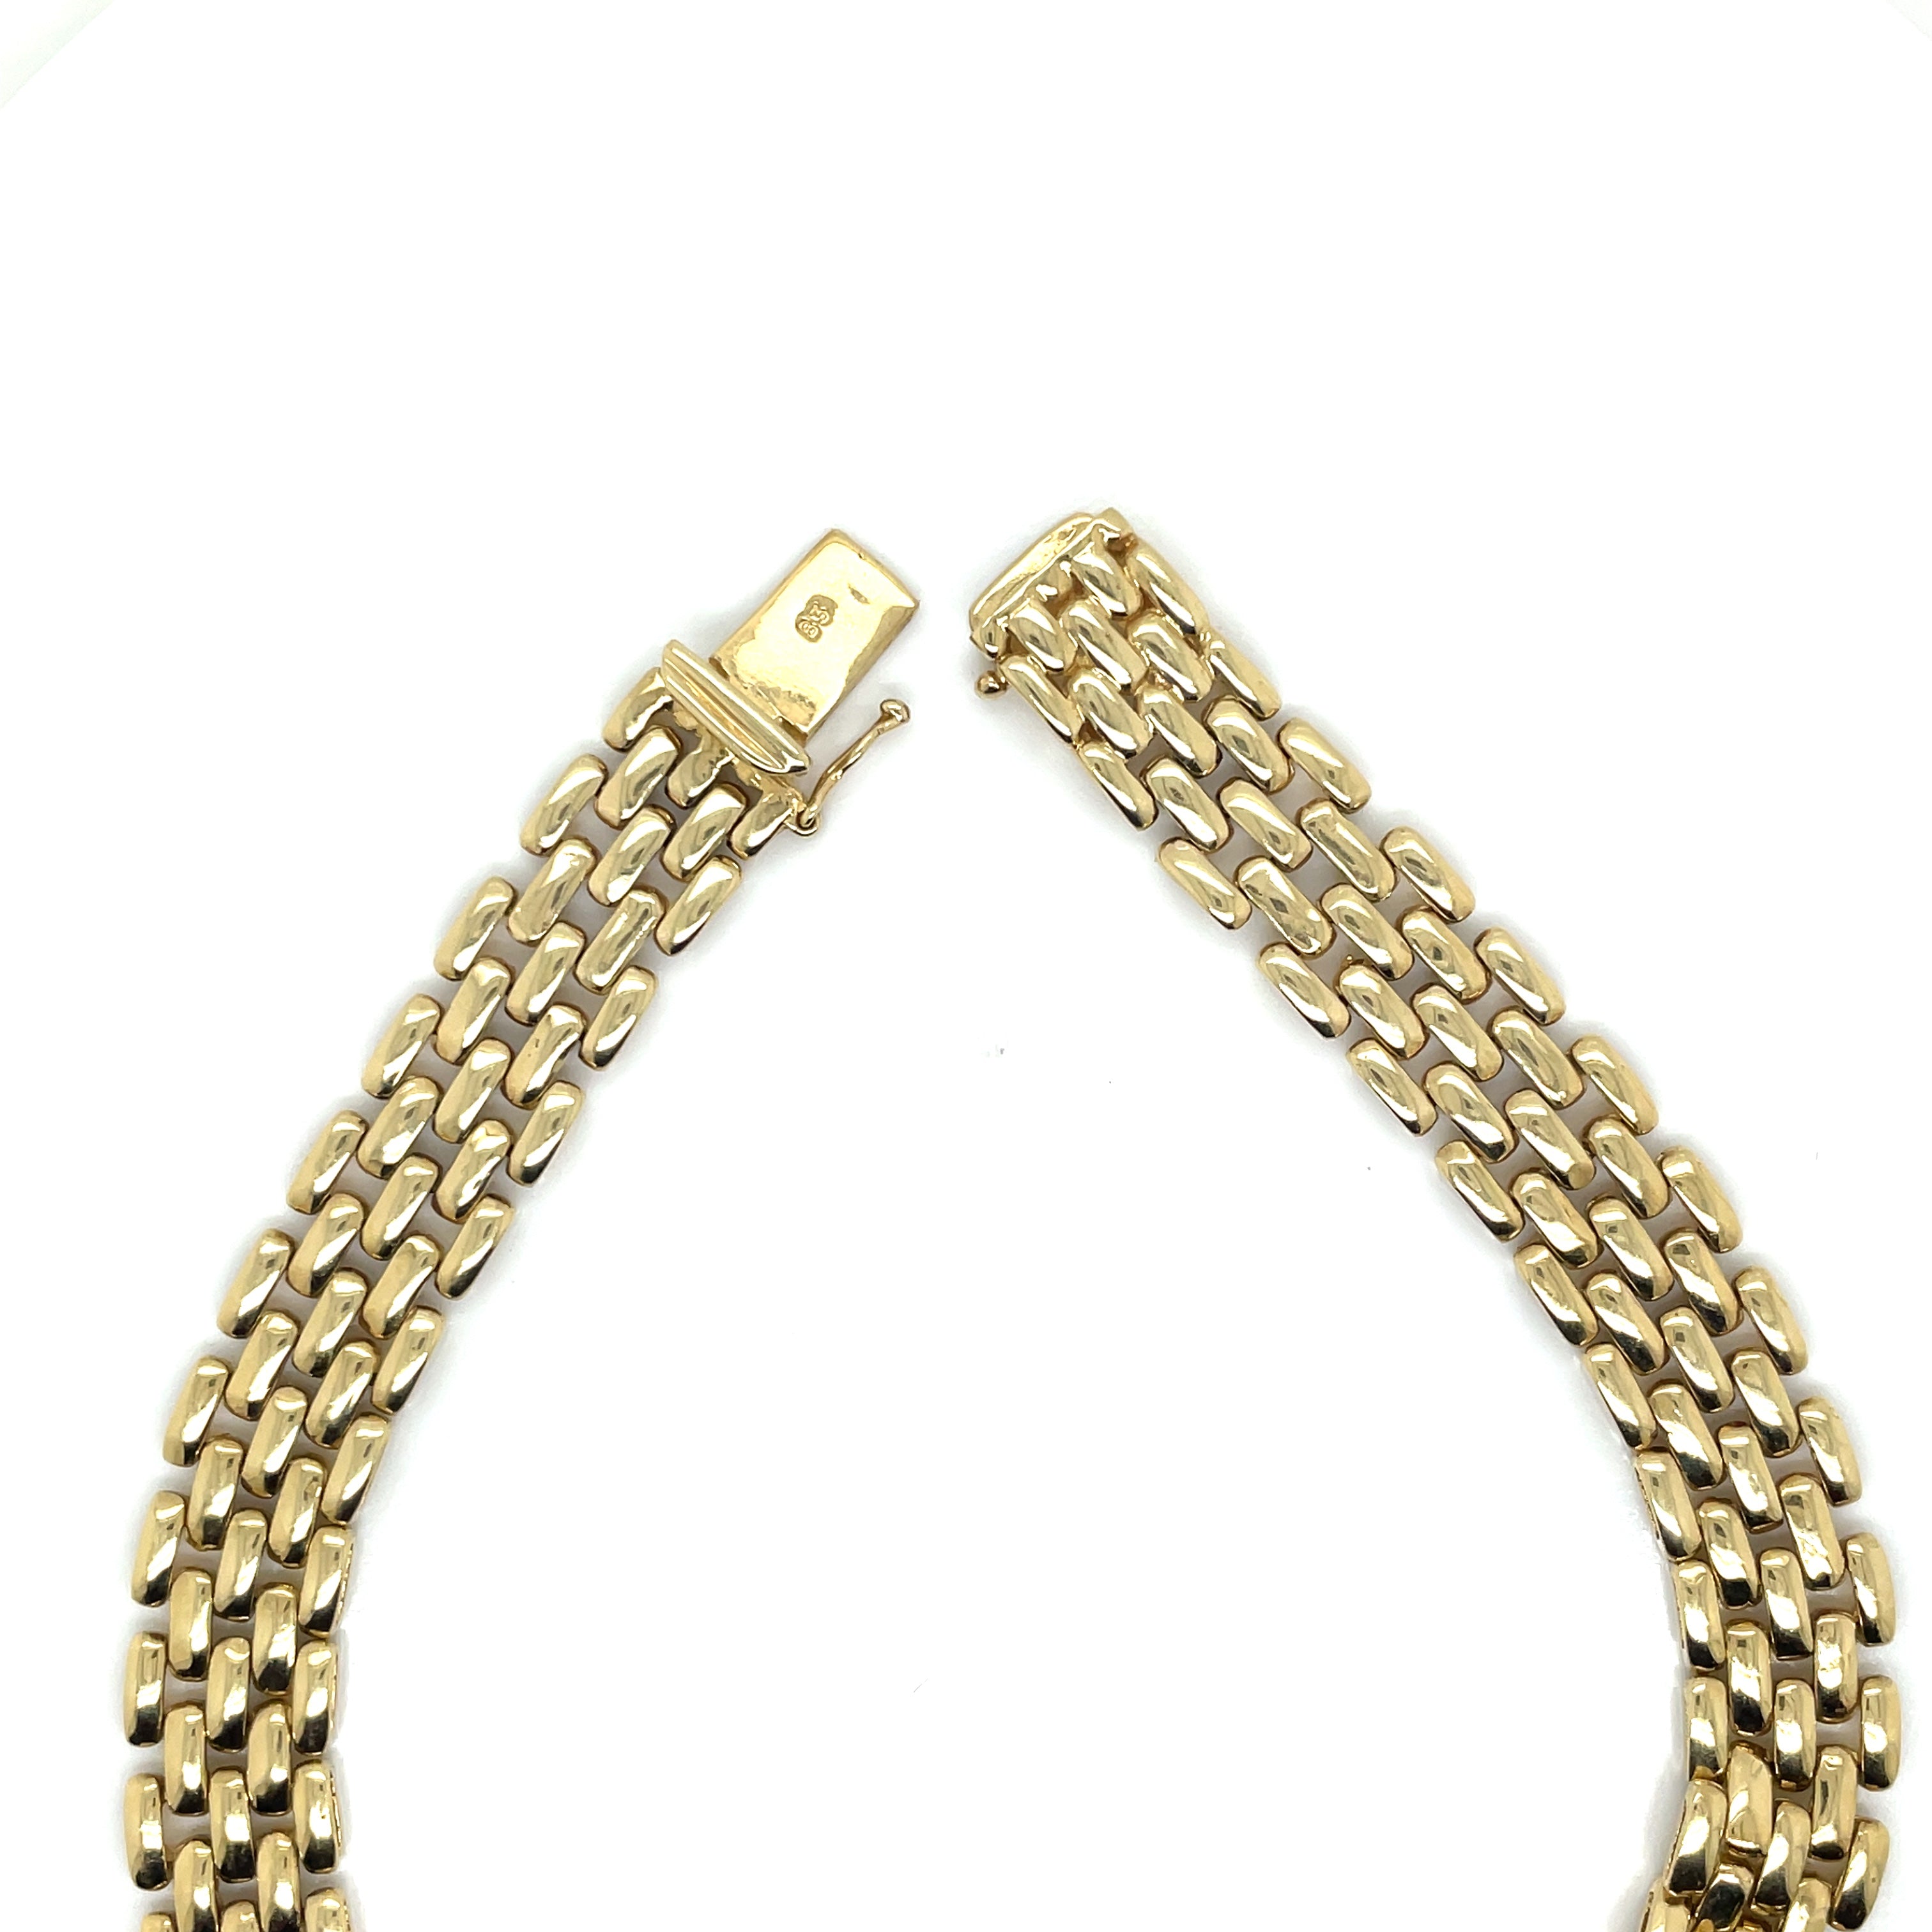 Impressive and Hefty Panther Link Necklace in 18k Yellow Gold - Ruby Lane